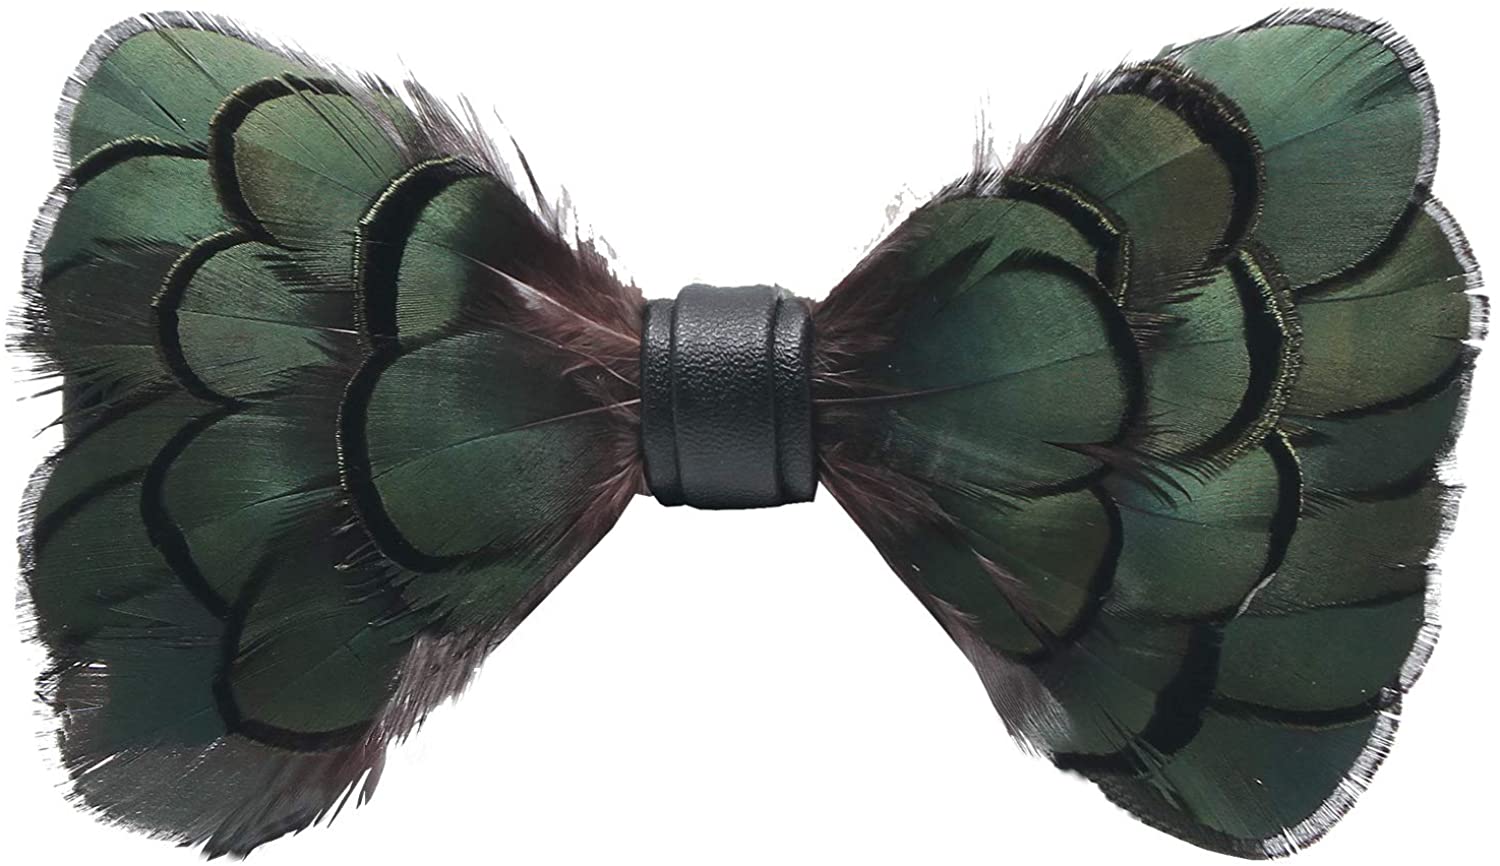 Mumusung Handmade Peacock Feather Pre-tied Bow tie for Men 